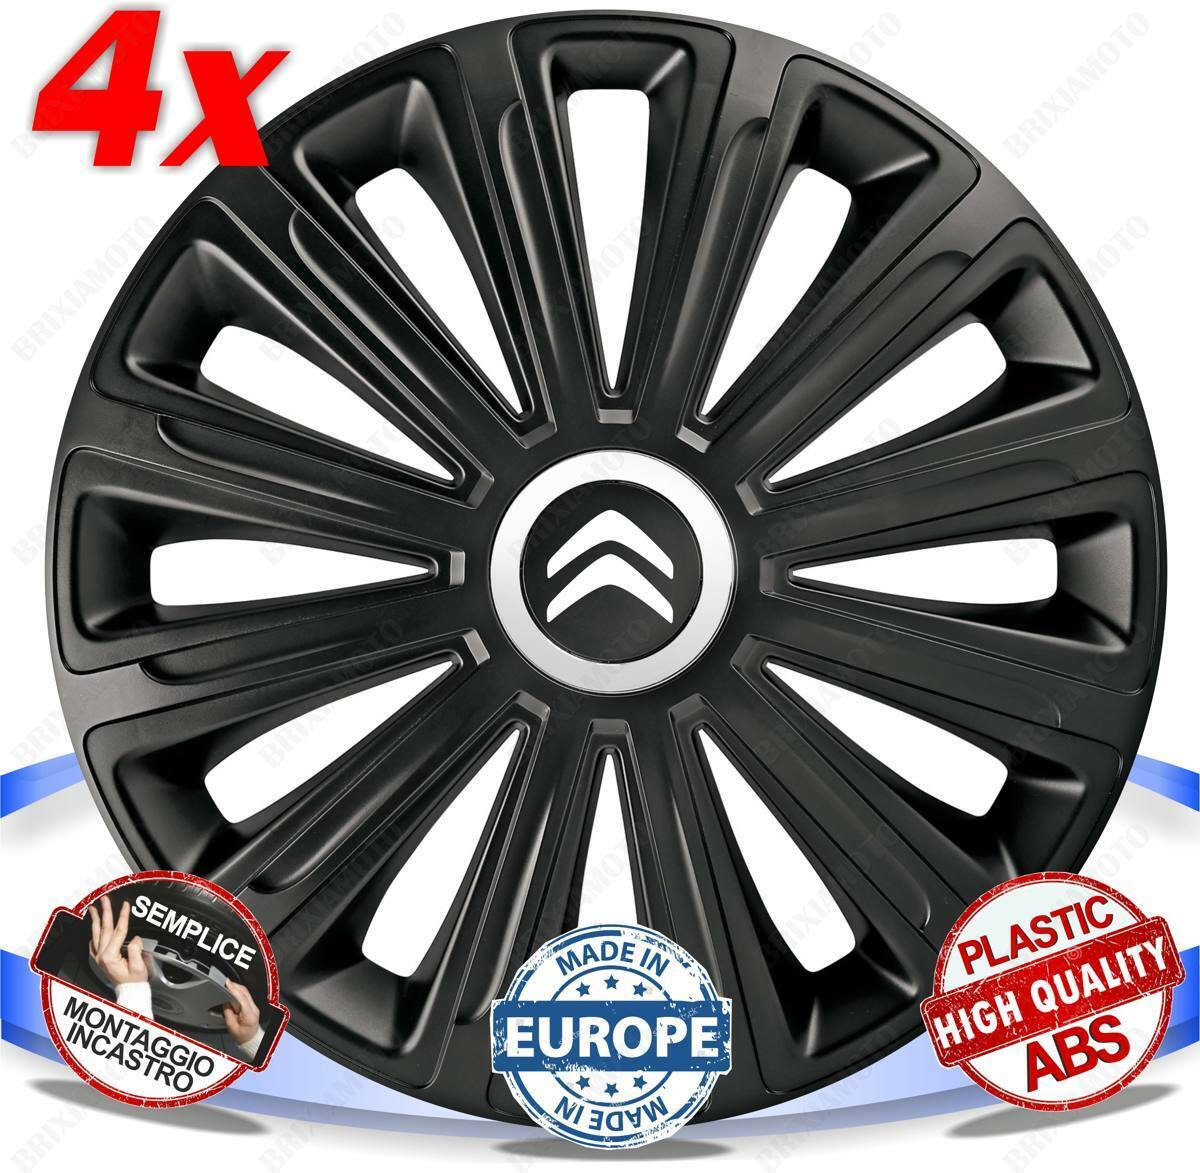 Set 4 Super sale At the price of surprise period limited Bolts Wheel Cover Wheels Caps D Trend Black 14 for Citroen